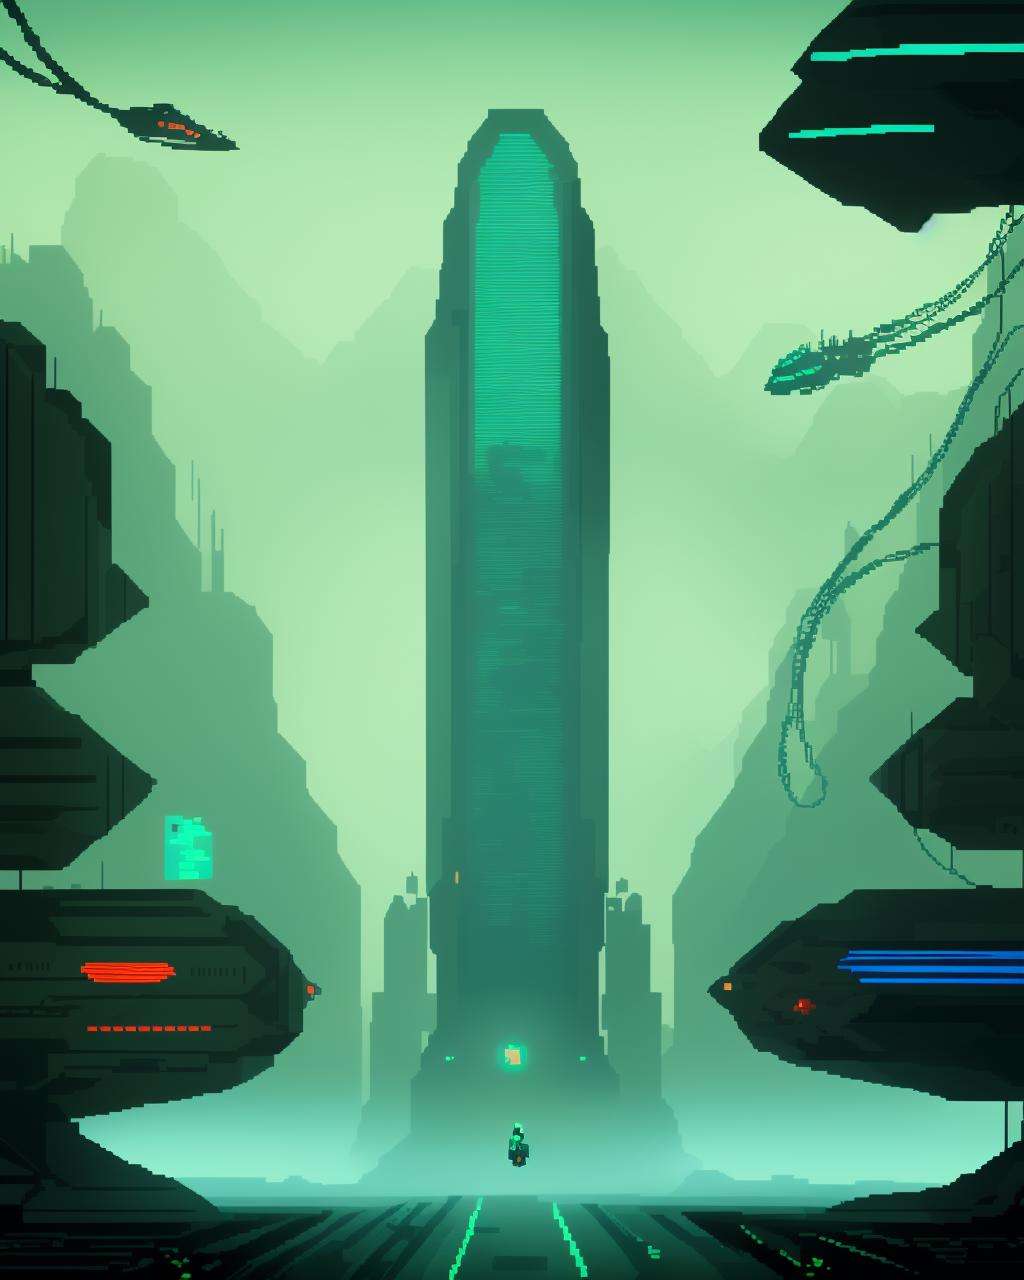 -A tense sci-fi movie scene set on a desolate planet, featuring towering alien architecture, flickering neon lights, and a group of human explorers. Atmospheric lighting, detailed textures, and hyper-realistic rendering bring the scene to life, while a sense of danger and tension permeates every frame. , pixel art